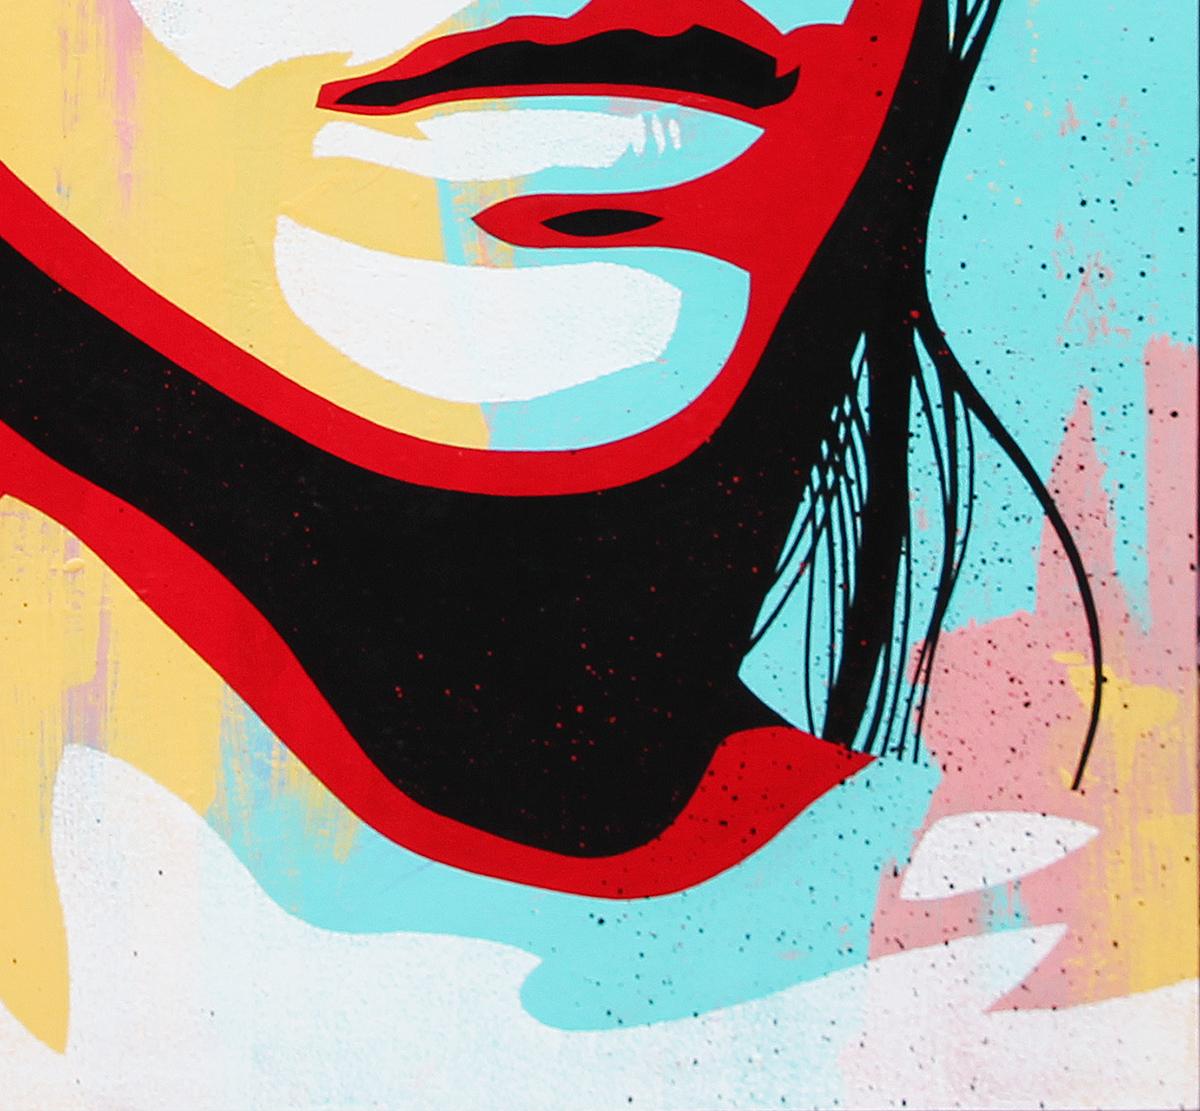 “Eclipse” Contemporary Blue, Orange, Red, & Pink Vectorized Female Portrait  - Beige Figurative Painting by Ed Booth 